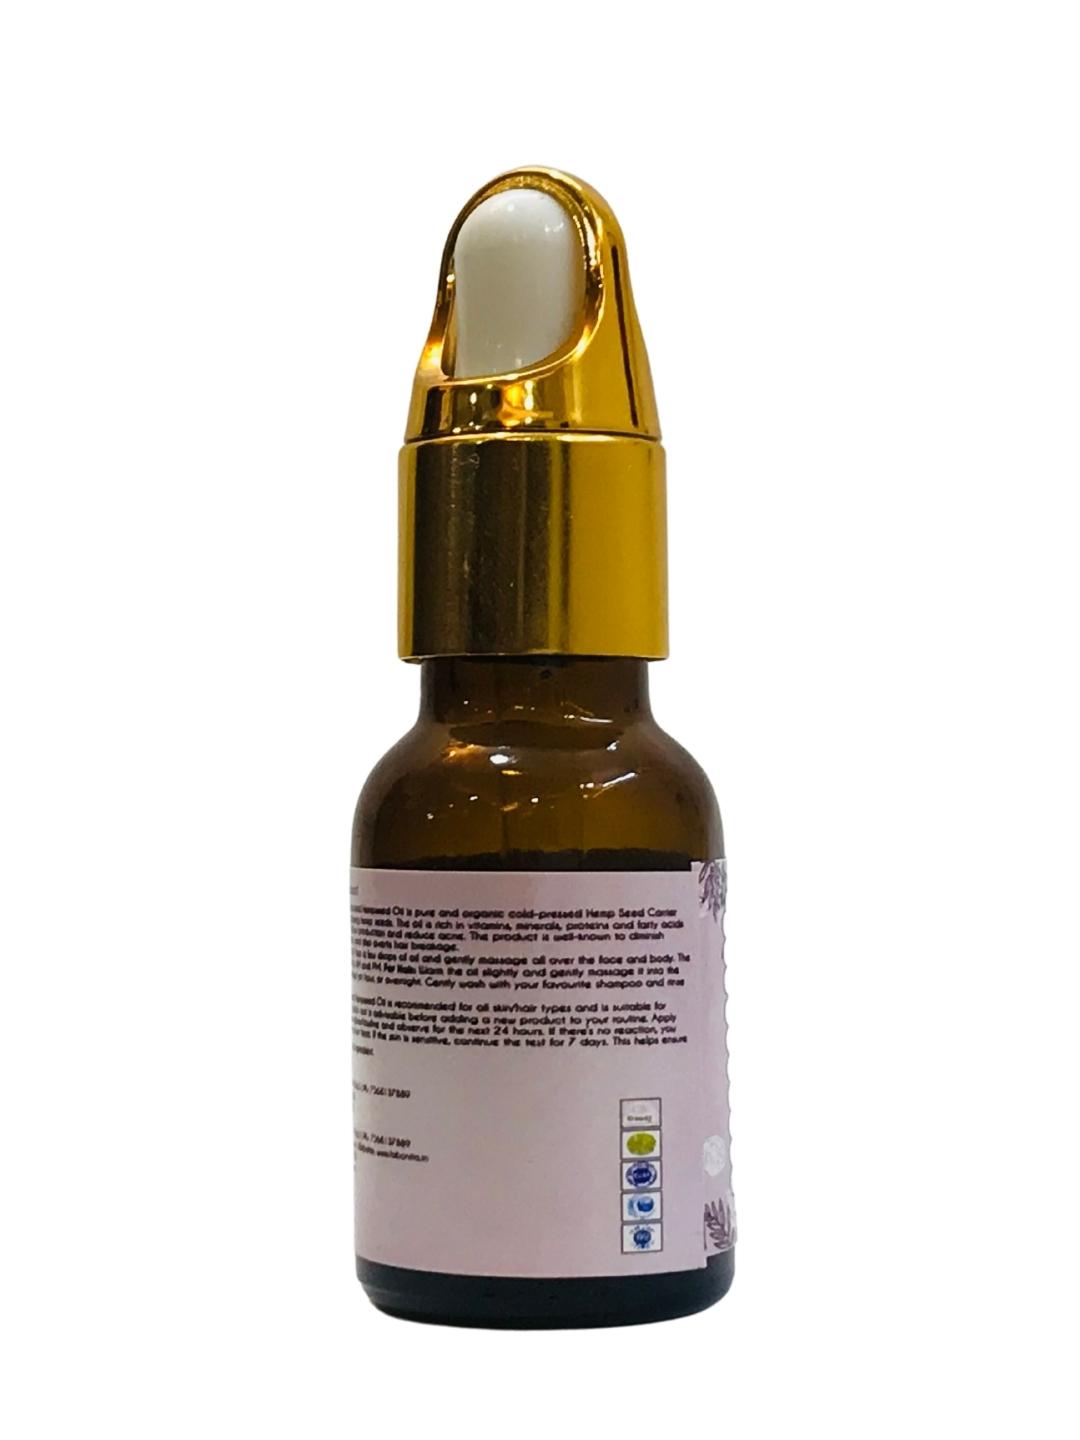 Cold Pressed Hempseed Oil With Omega-6 Fatty Acid For Acne-Prone Skin & All Hair Types